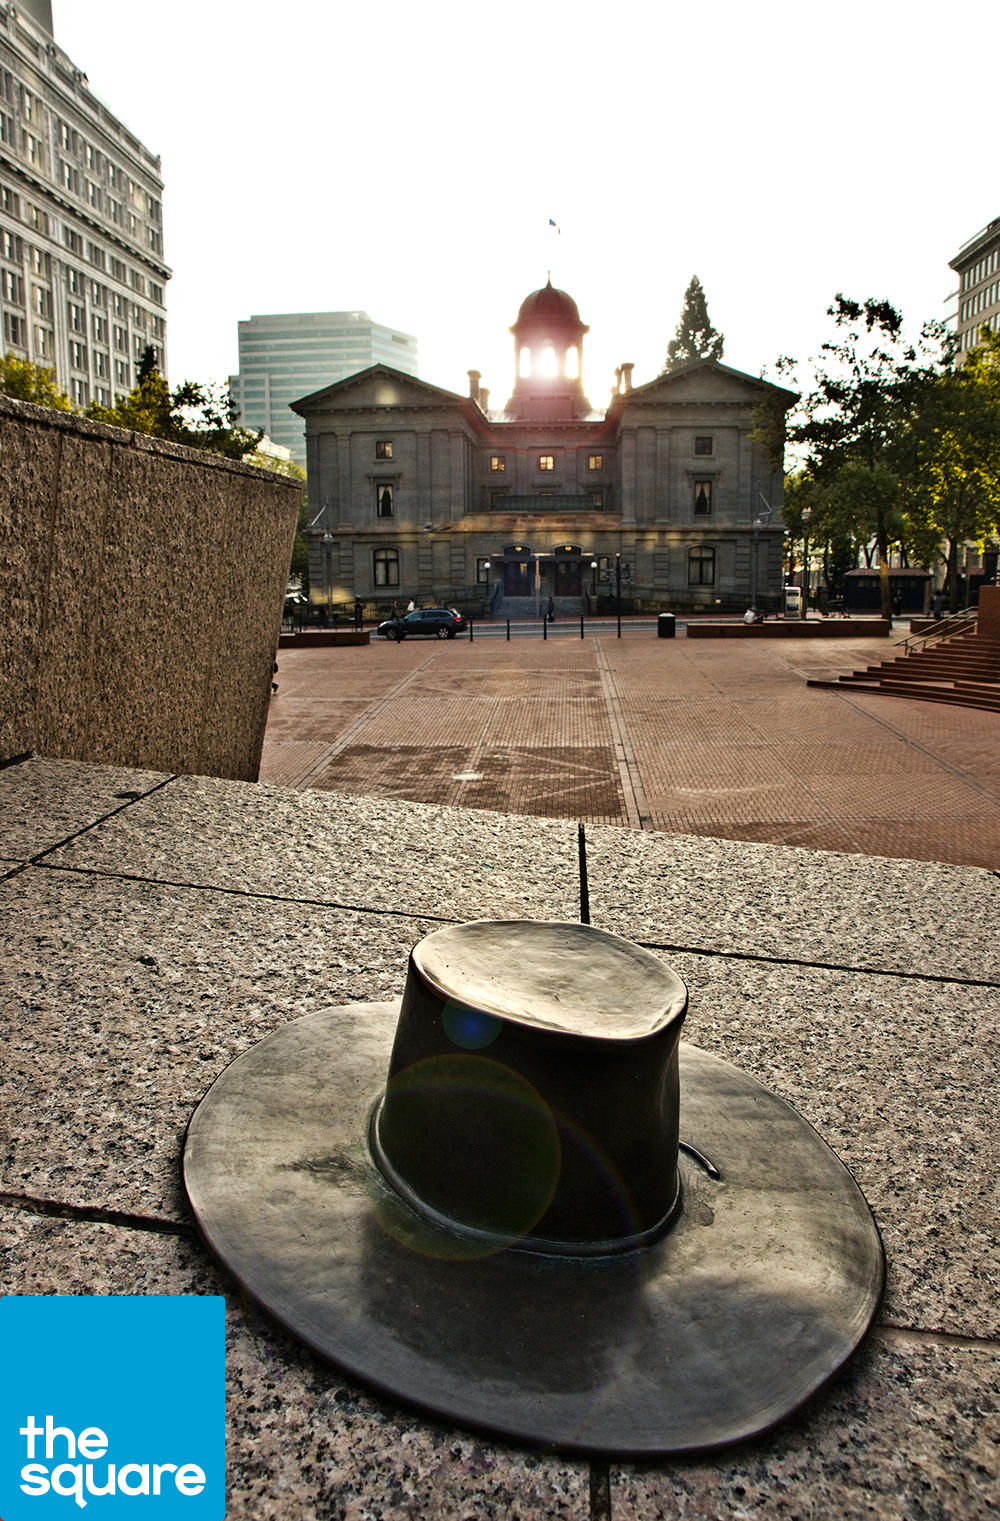 Will Martin's Hat - In 1980, Willard Martin's team submitted the winning design of Pioneer Courthouse Square to the Portland Development Commission, prevailing over 160 submissions. As a tribute to his great design, a bronze replica of Will's signature wide-rim river hat is located next to the keystone lectern, above the Visitor Information Center—as if he had tossed it there while walking by today.